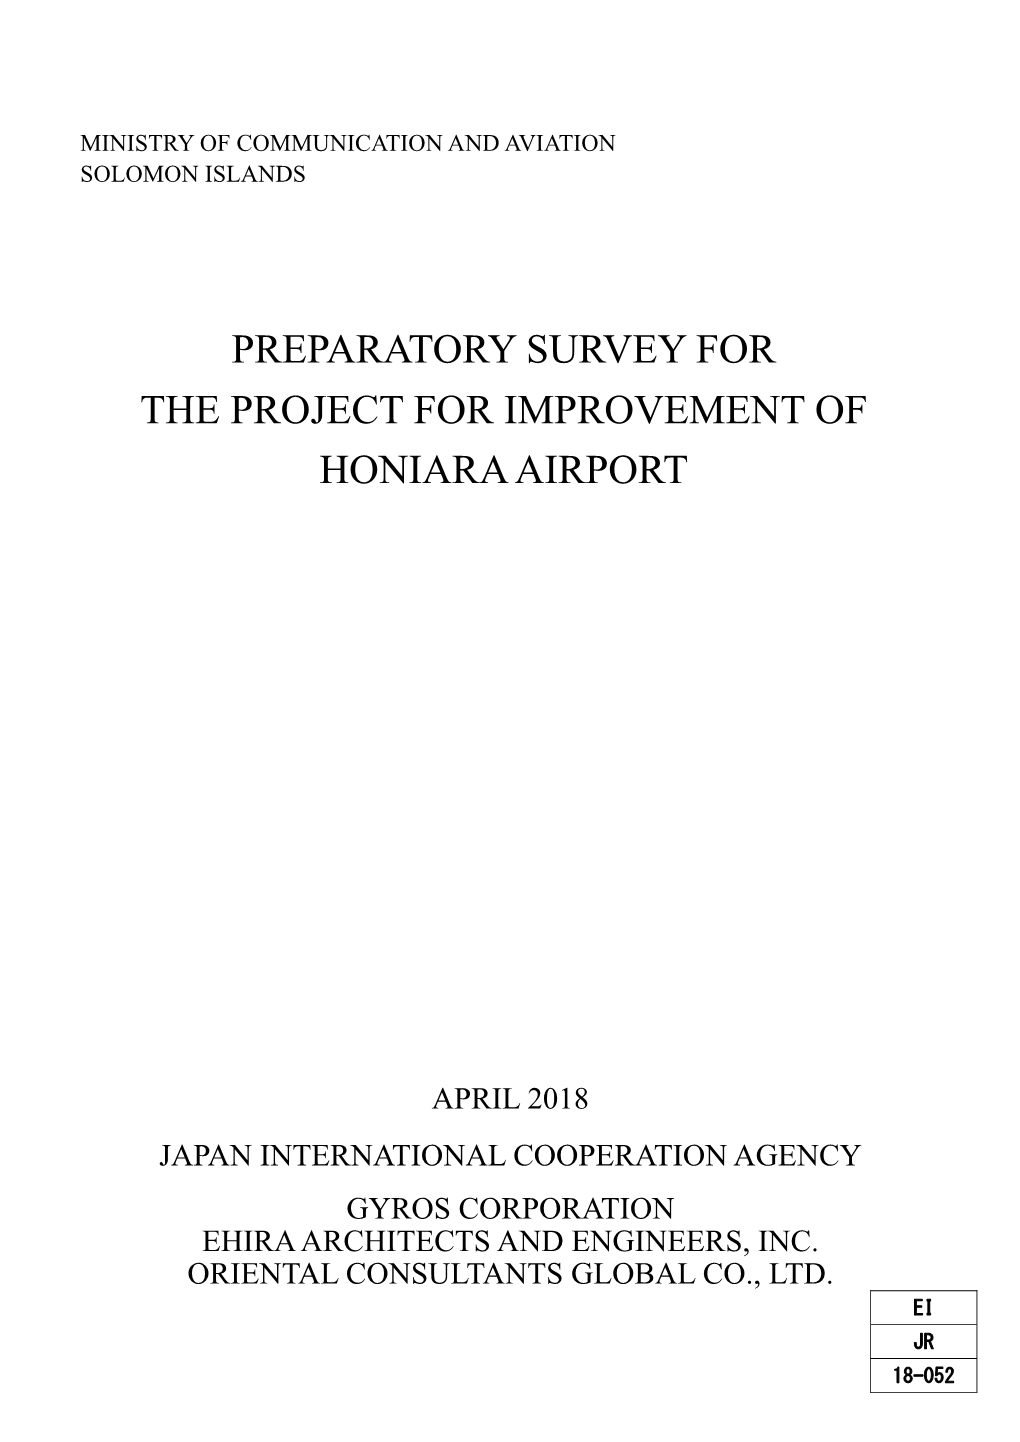 Preparatory Survey for the Project for Improvement of Honiara Airport